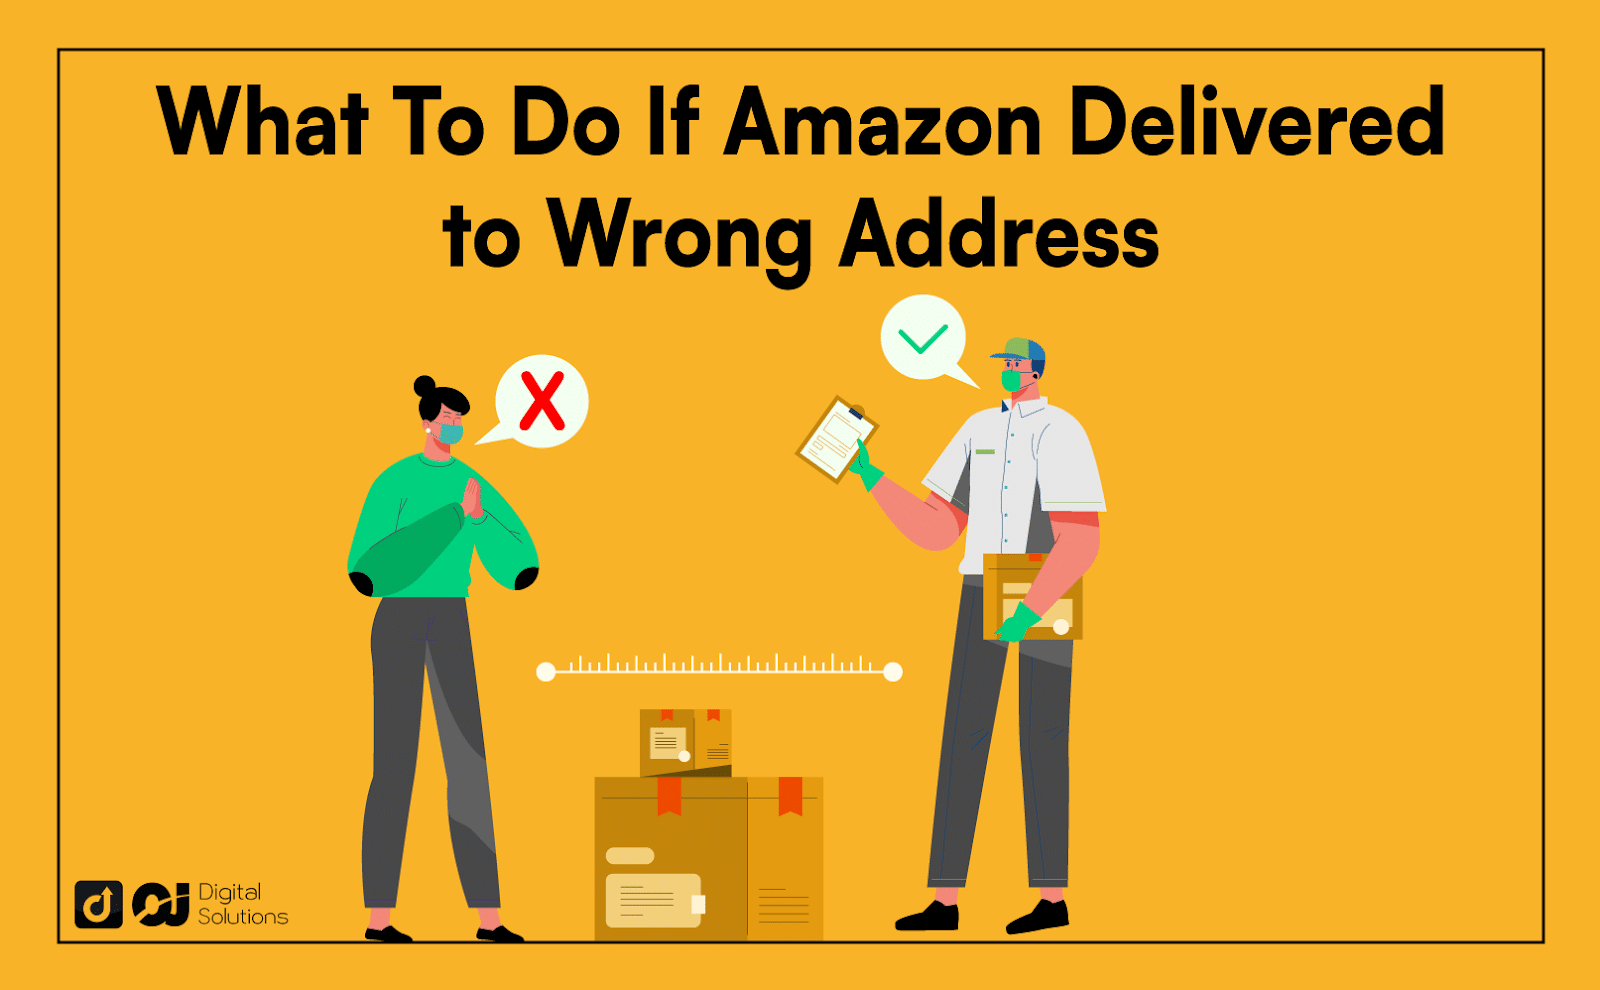 Amazon Delivered to Wrong Address